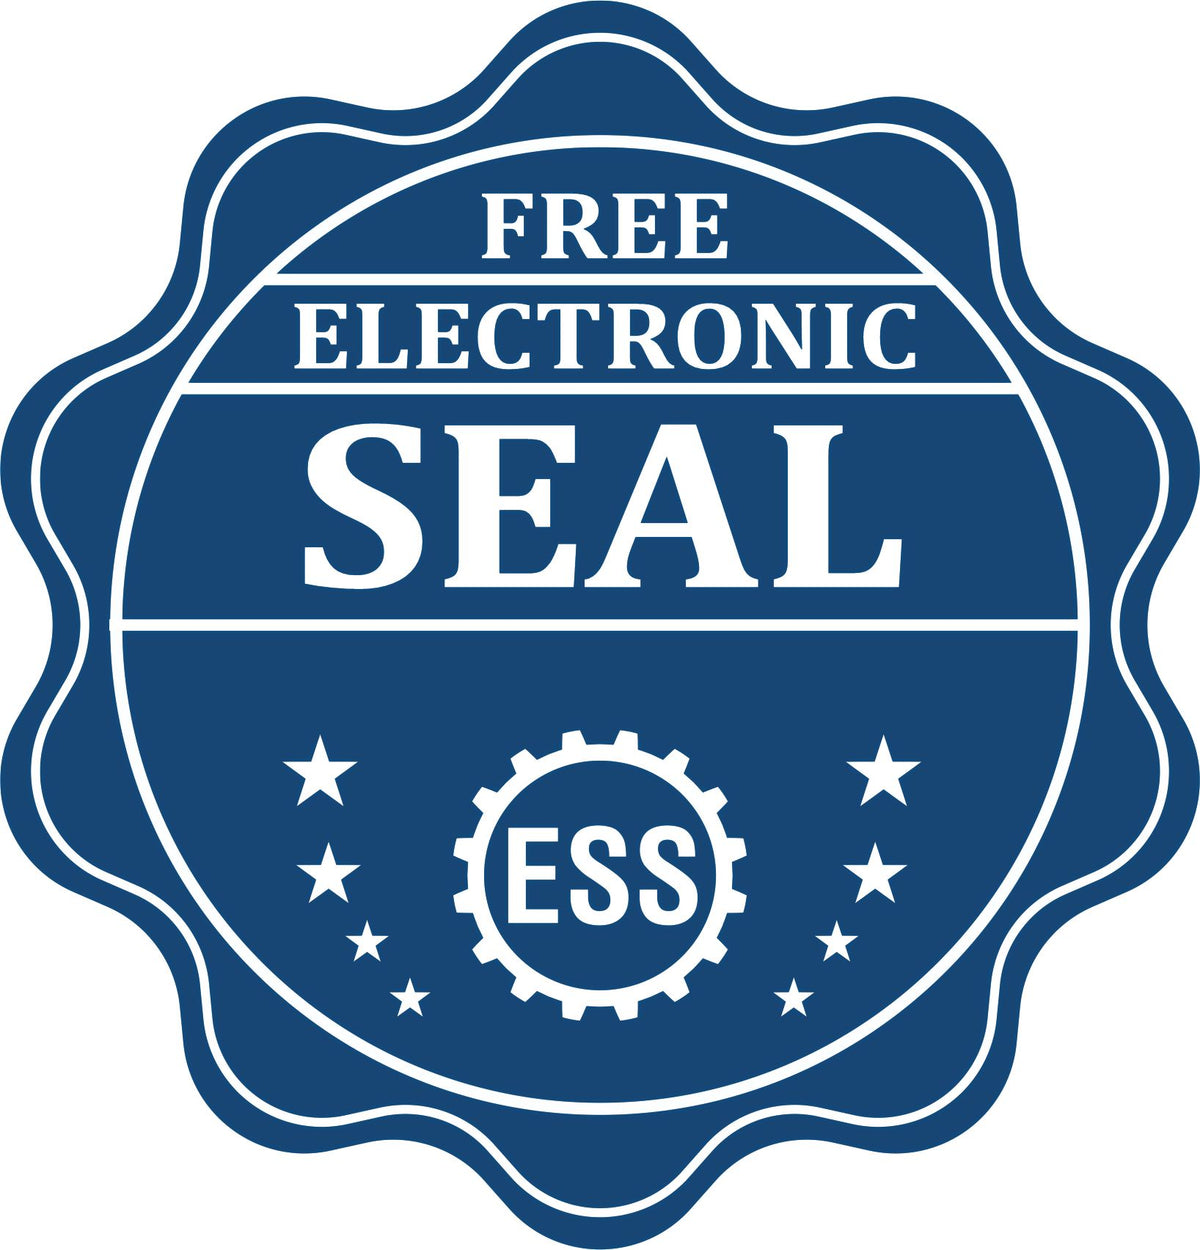 A badge showing a free electronic seal for the Gift Texas Landscape Architect Seal with stars and the ESS gear on the emblem.